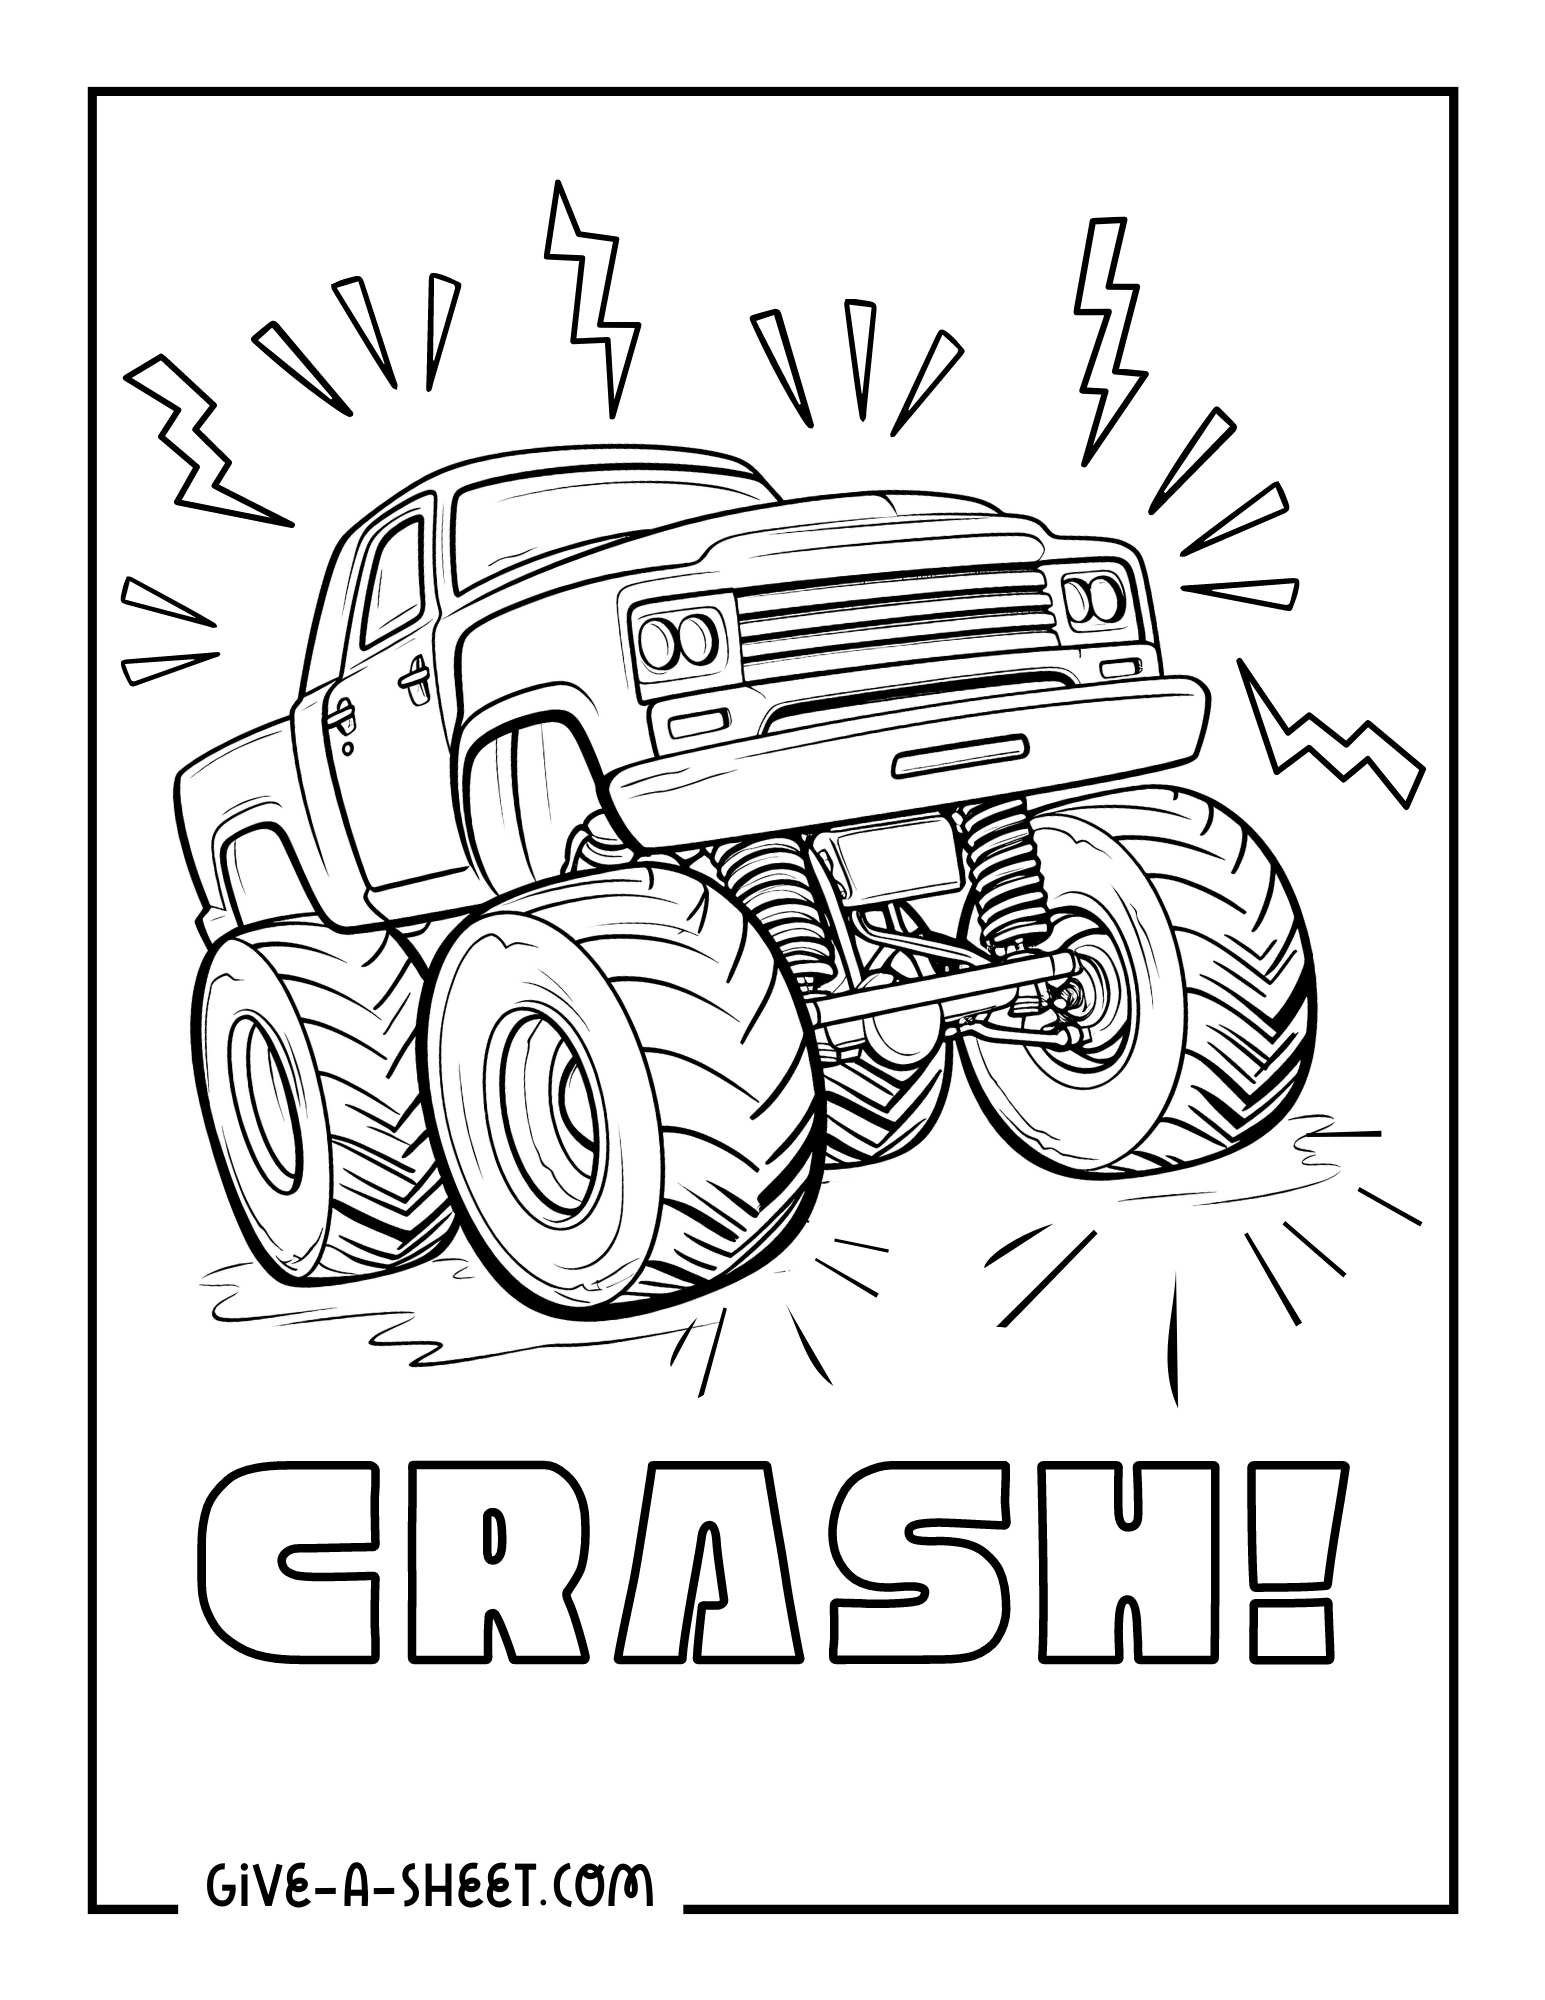 Monster jam circuit competition coloring page for adults.